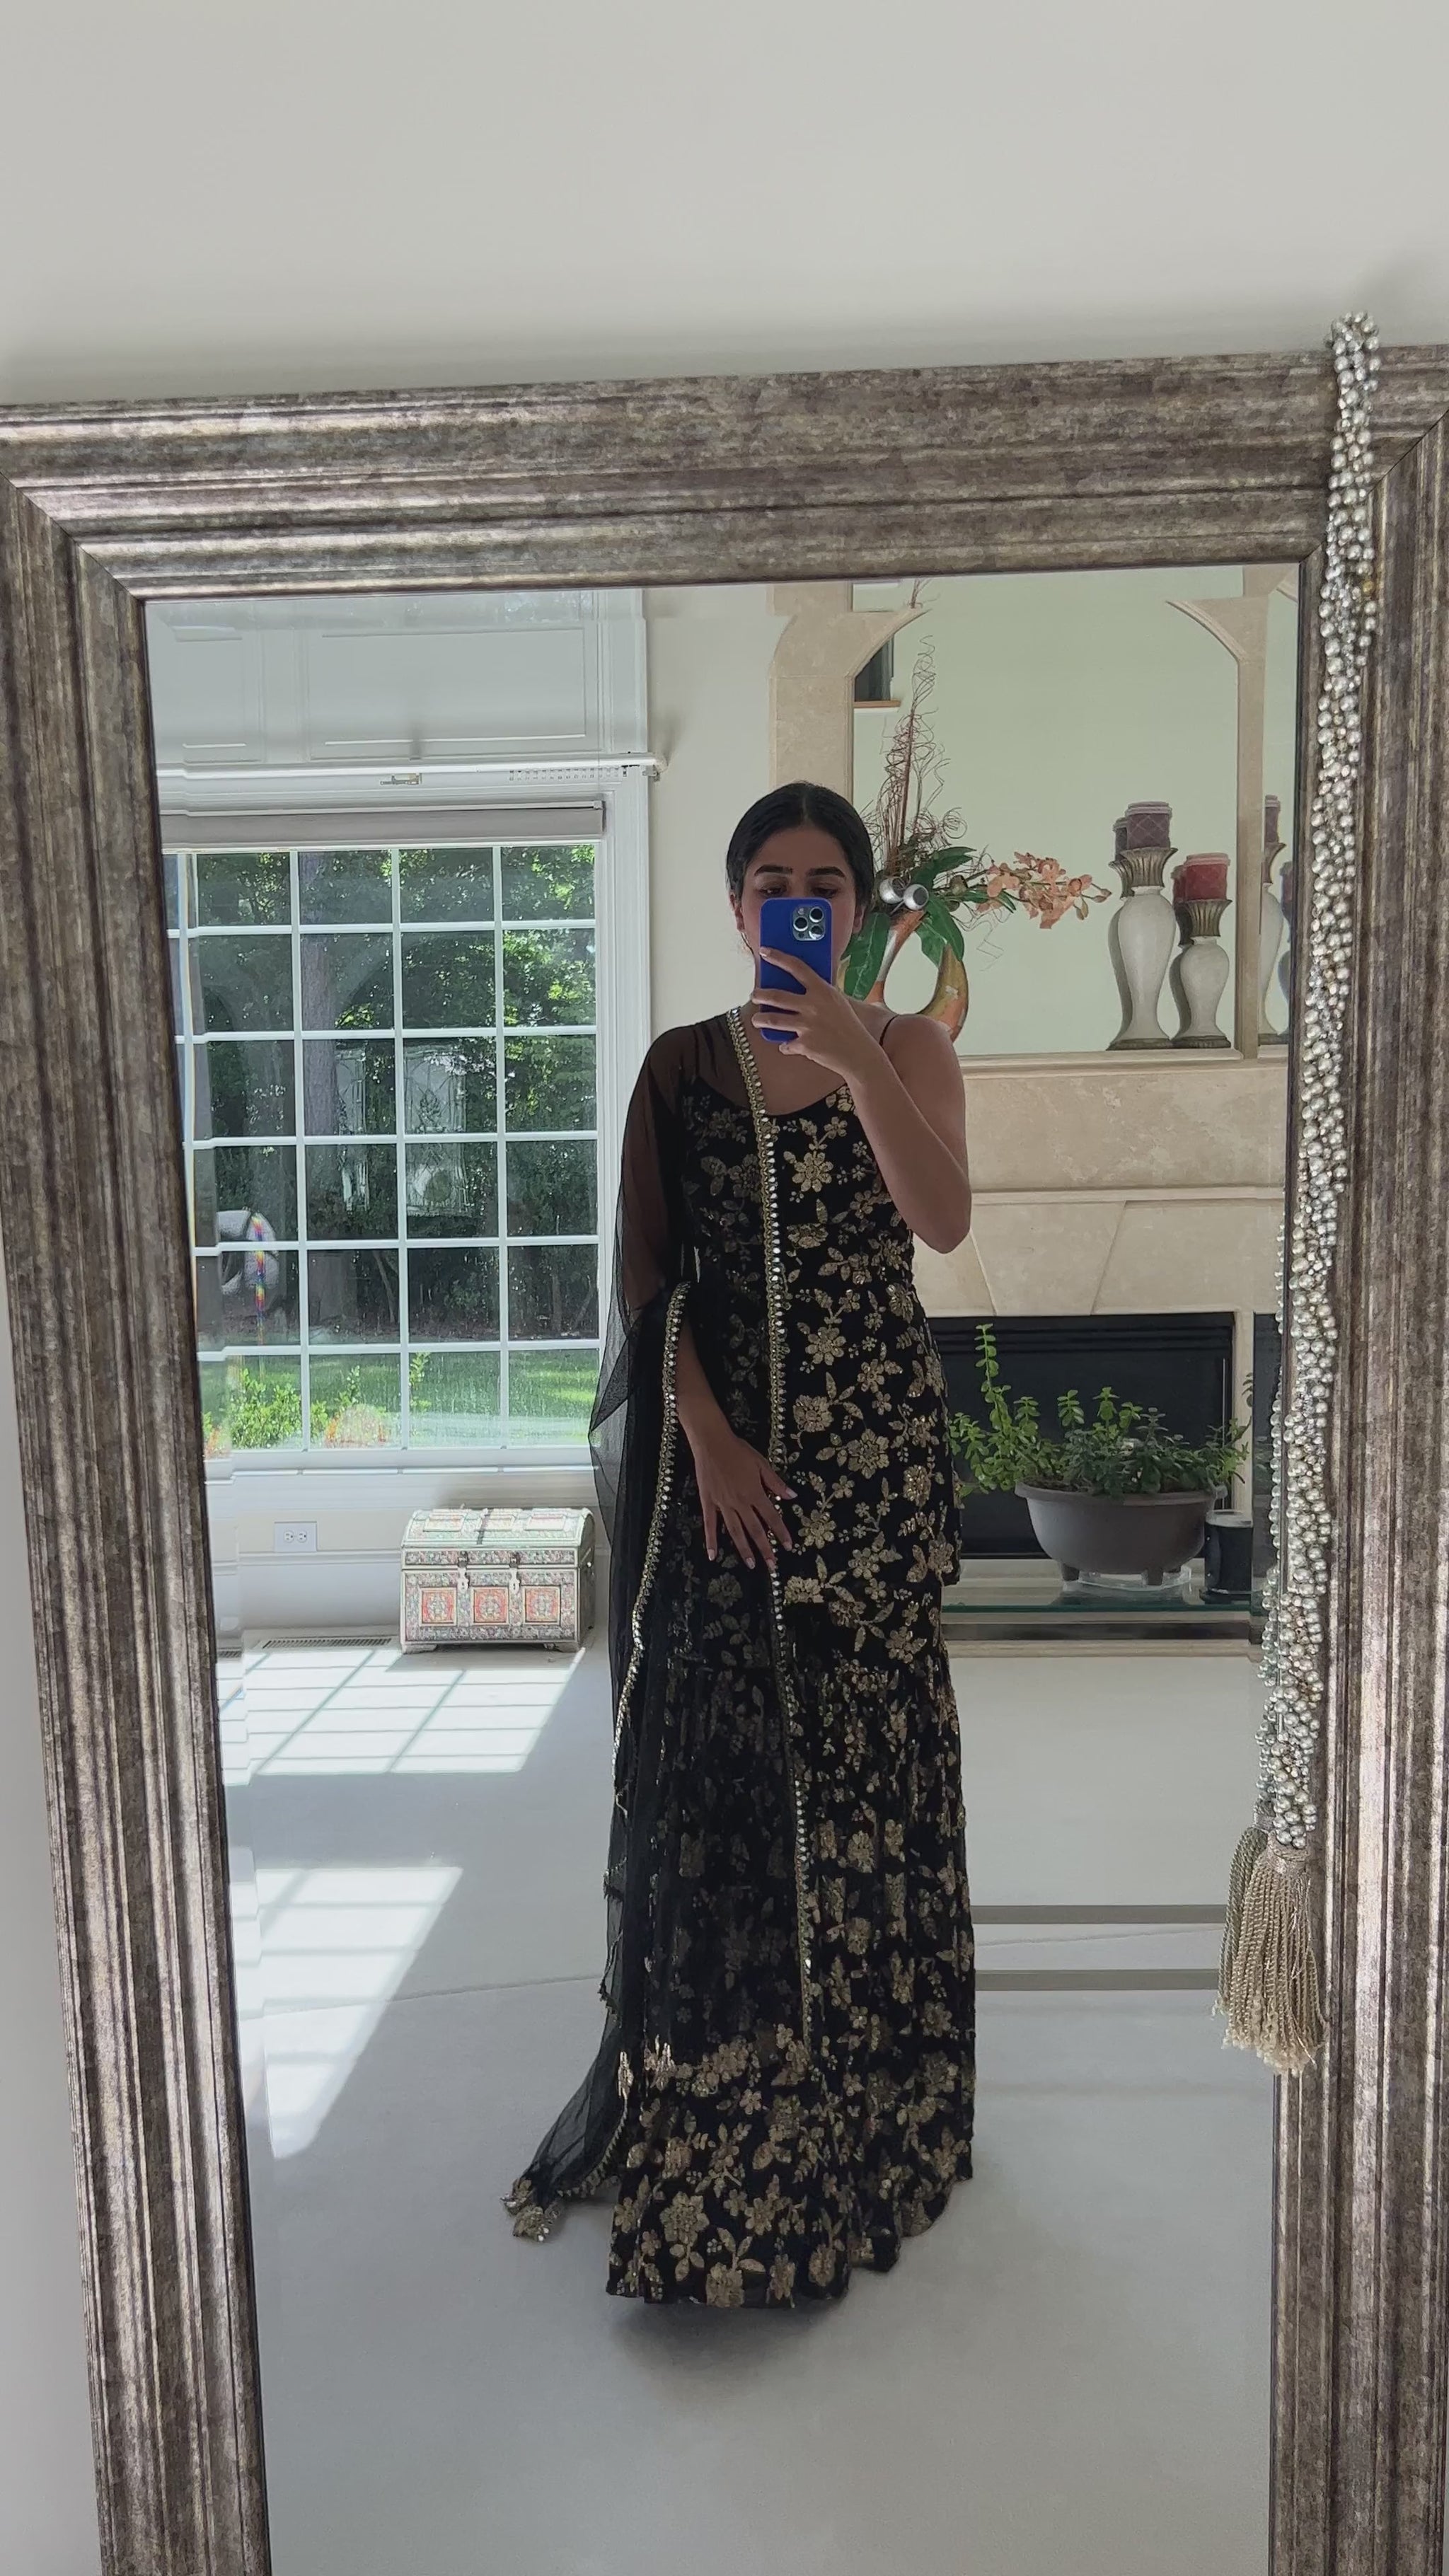 Woman in black and gold sequin outfit with Gharara pant, top, and dupatta